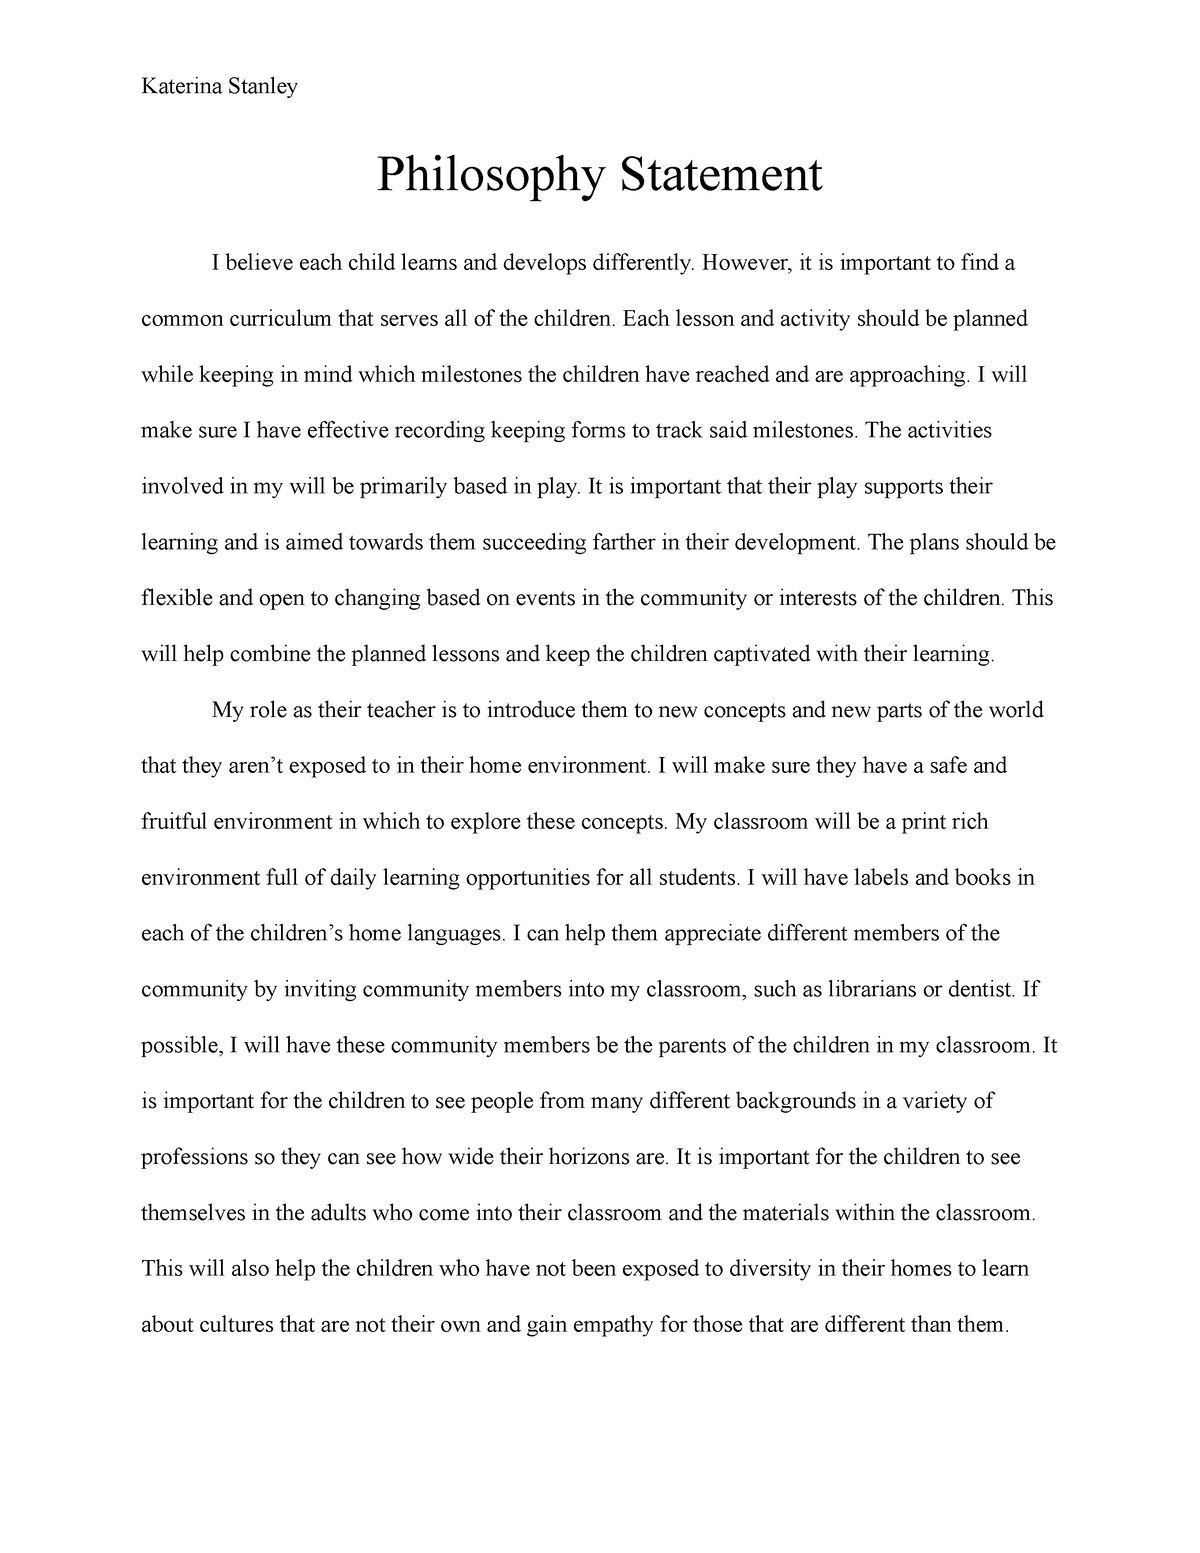 personal philosophy statement essay examples